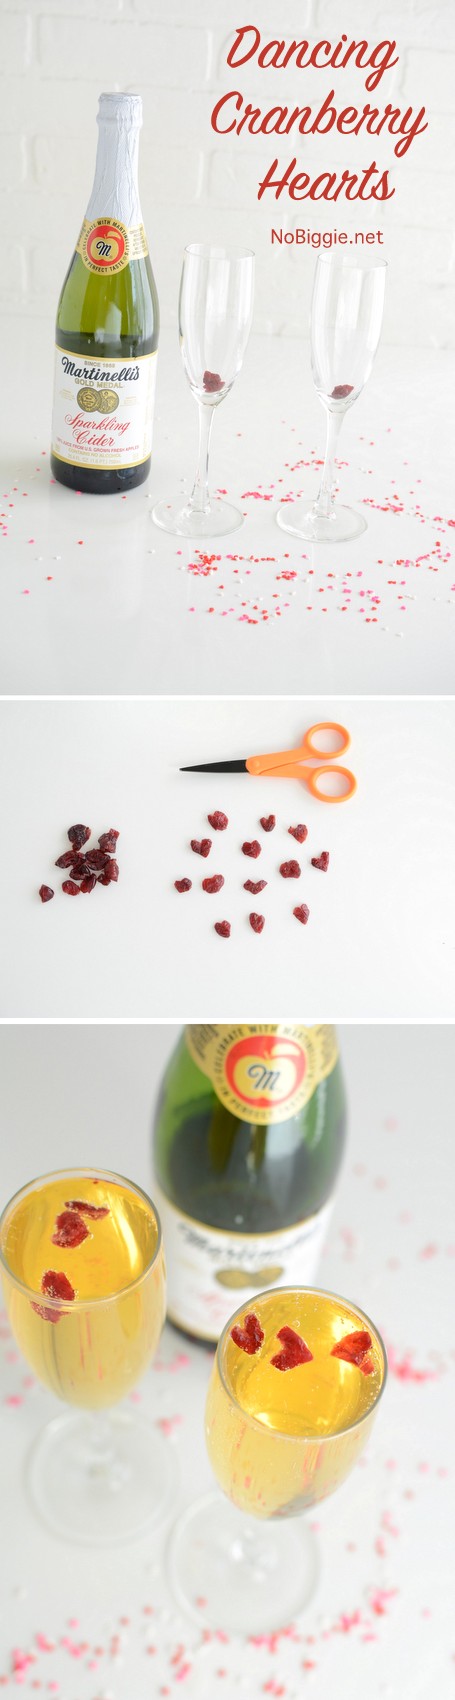 dancing cranberry hearts | watch how these tiny dried cranberry hearts dance in champagne | Video on NoBiggie.net